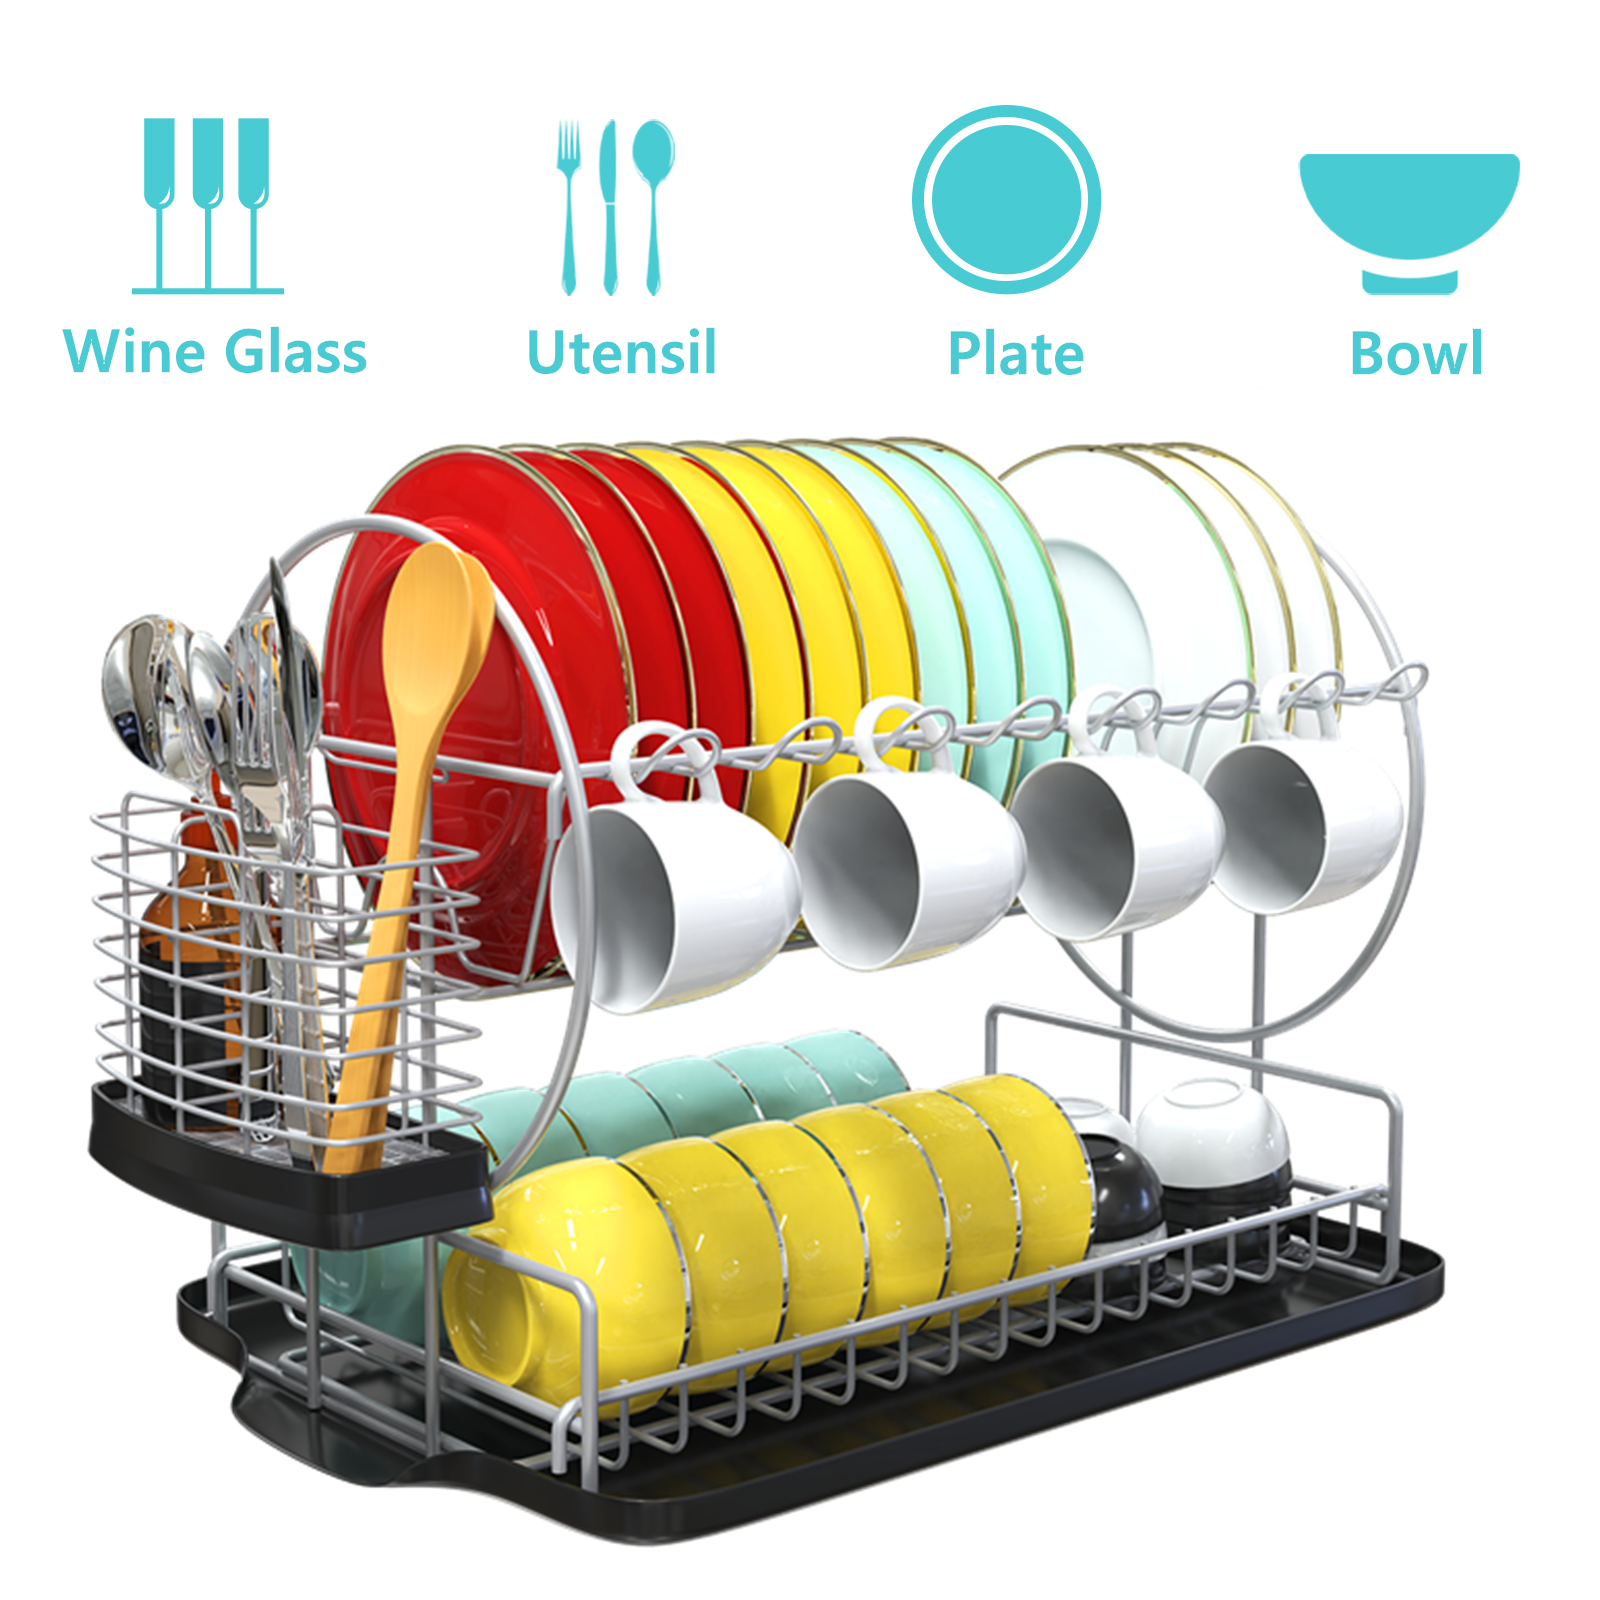 iSPECLE Dish Drying Rack - 2 Tier Dish Rack with Cup Holder, Dish Drainer  with Drainboard and Utensil Holder Large Capacity for Small Kitchen